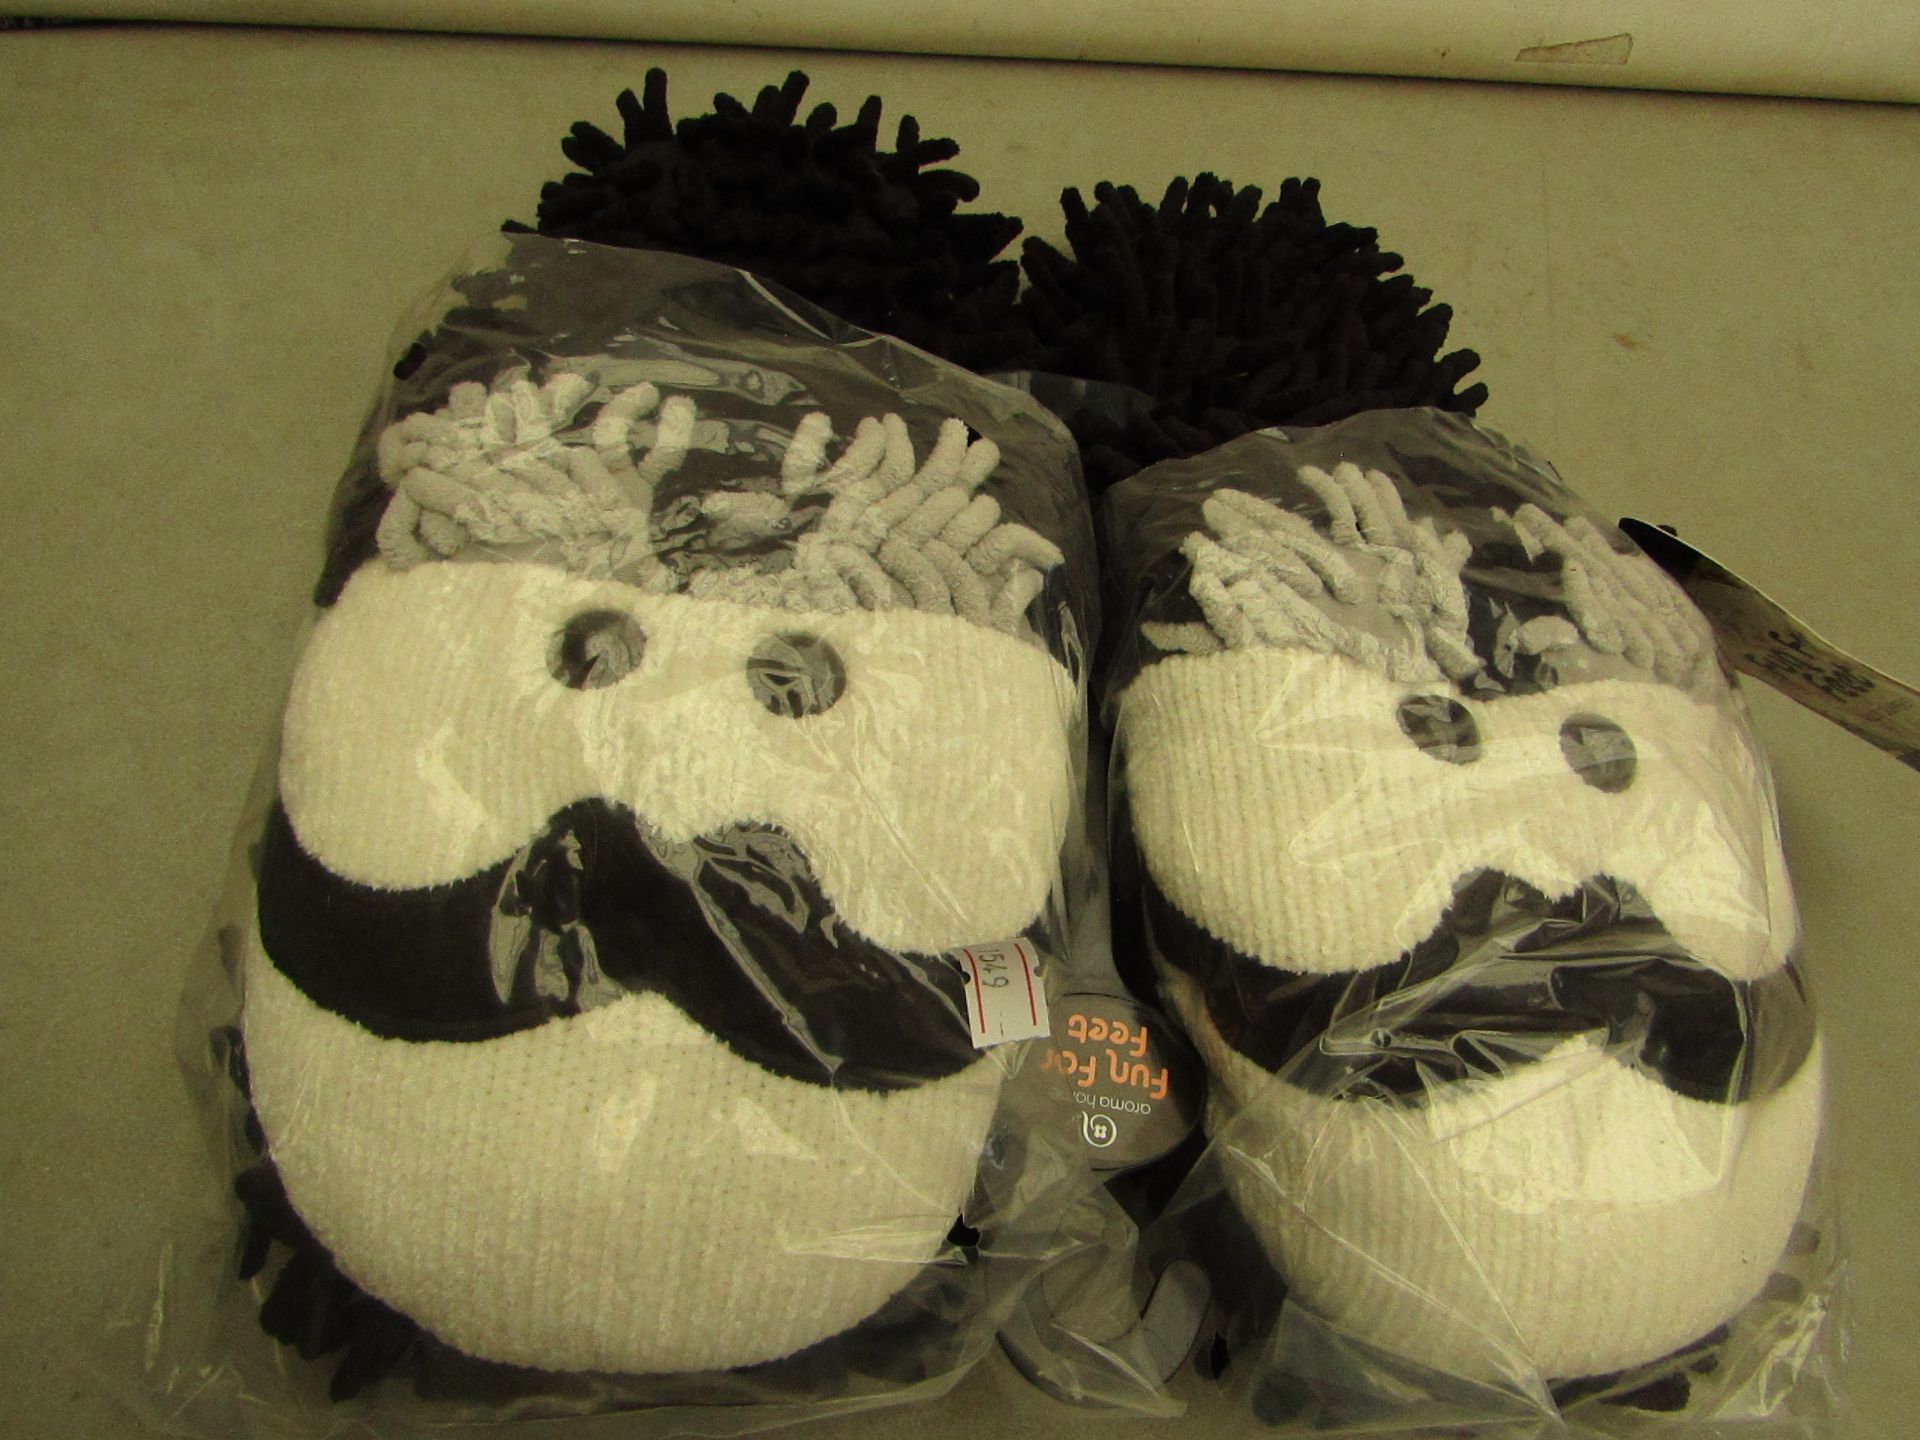 Pair of Fun For Feet Fuzzy Slippers. Size 7. New & packaged